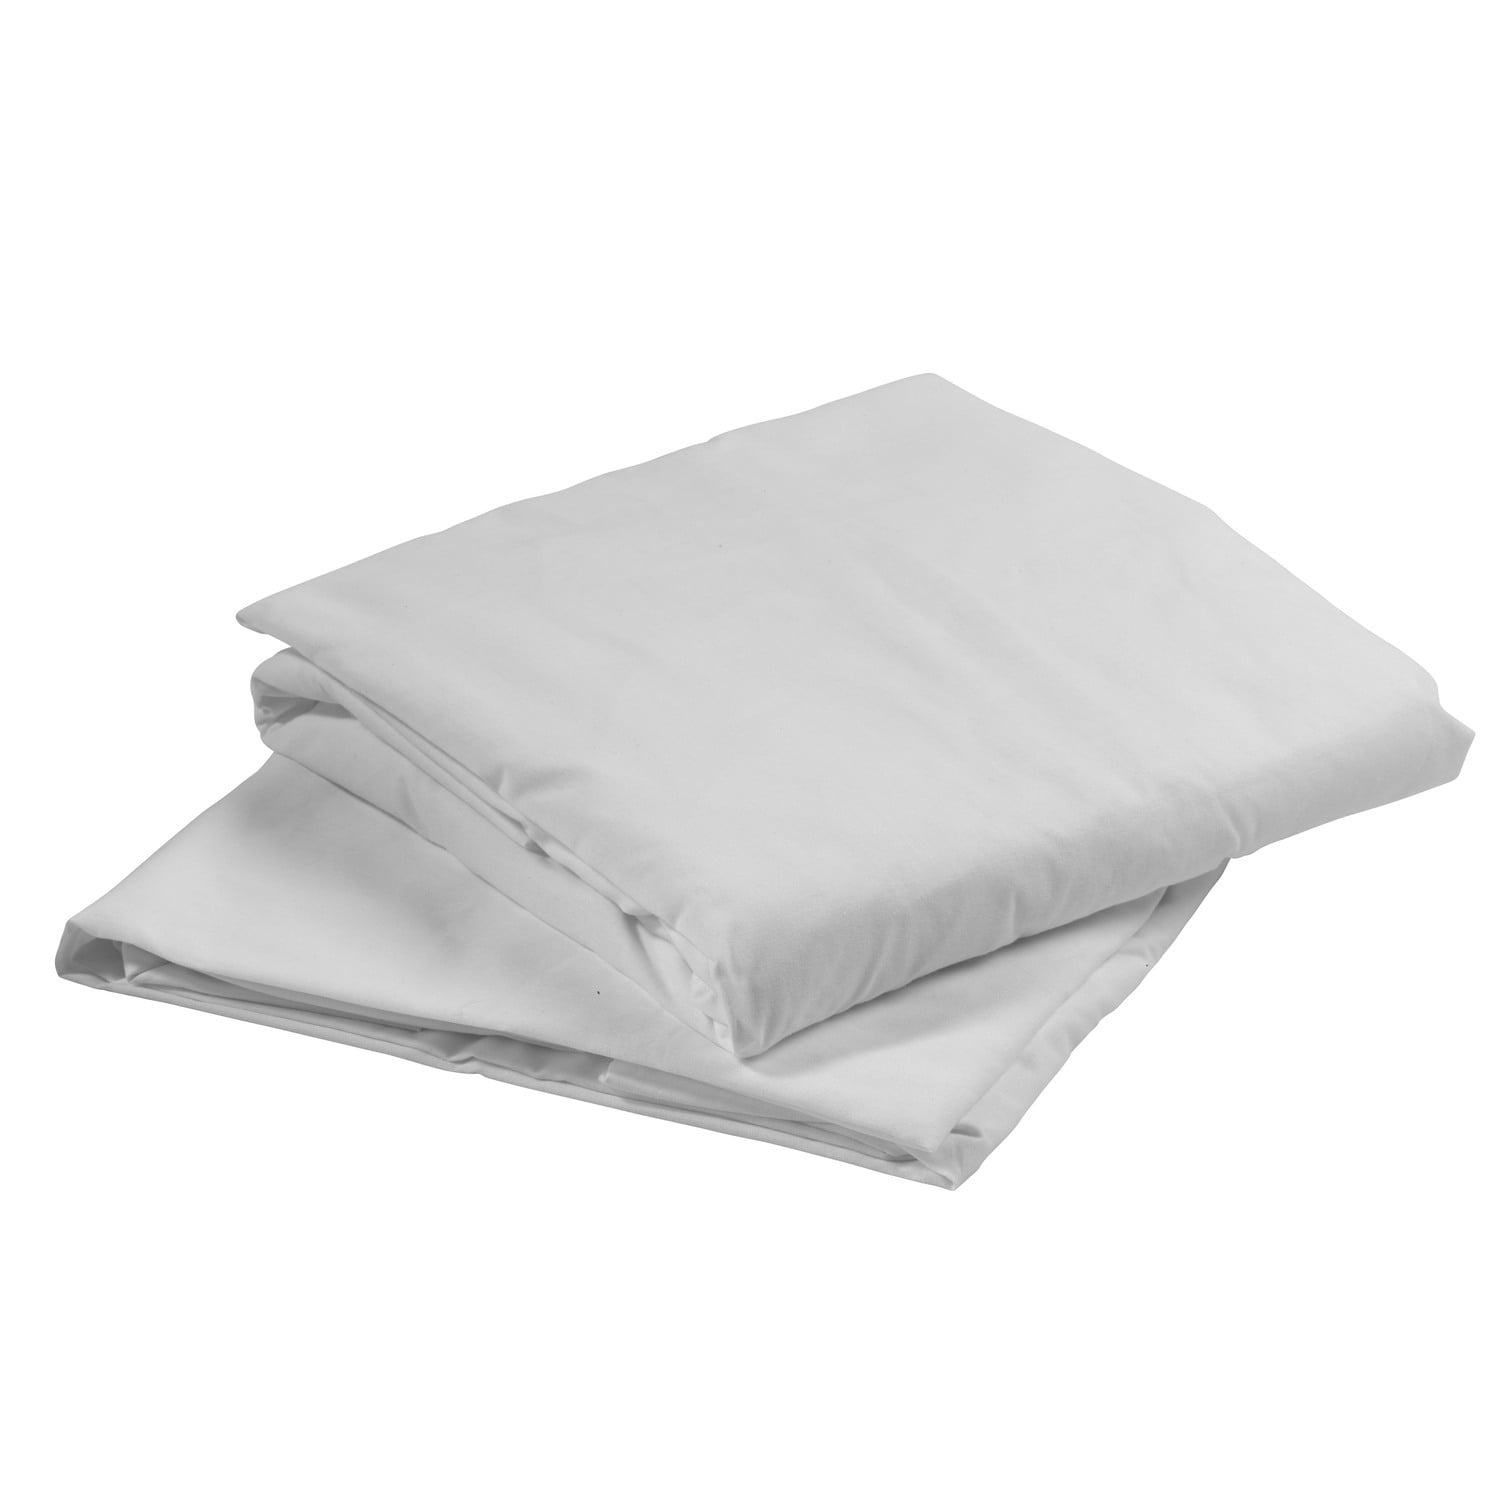 Fitted Hospital Bed Sheet Twin Extra, Twin Size Hospital Bed Sheets